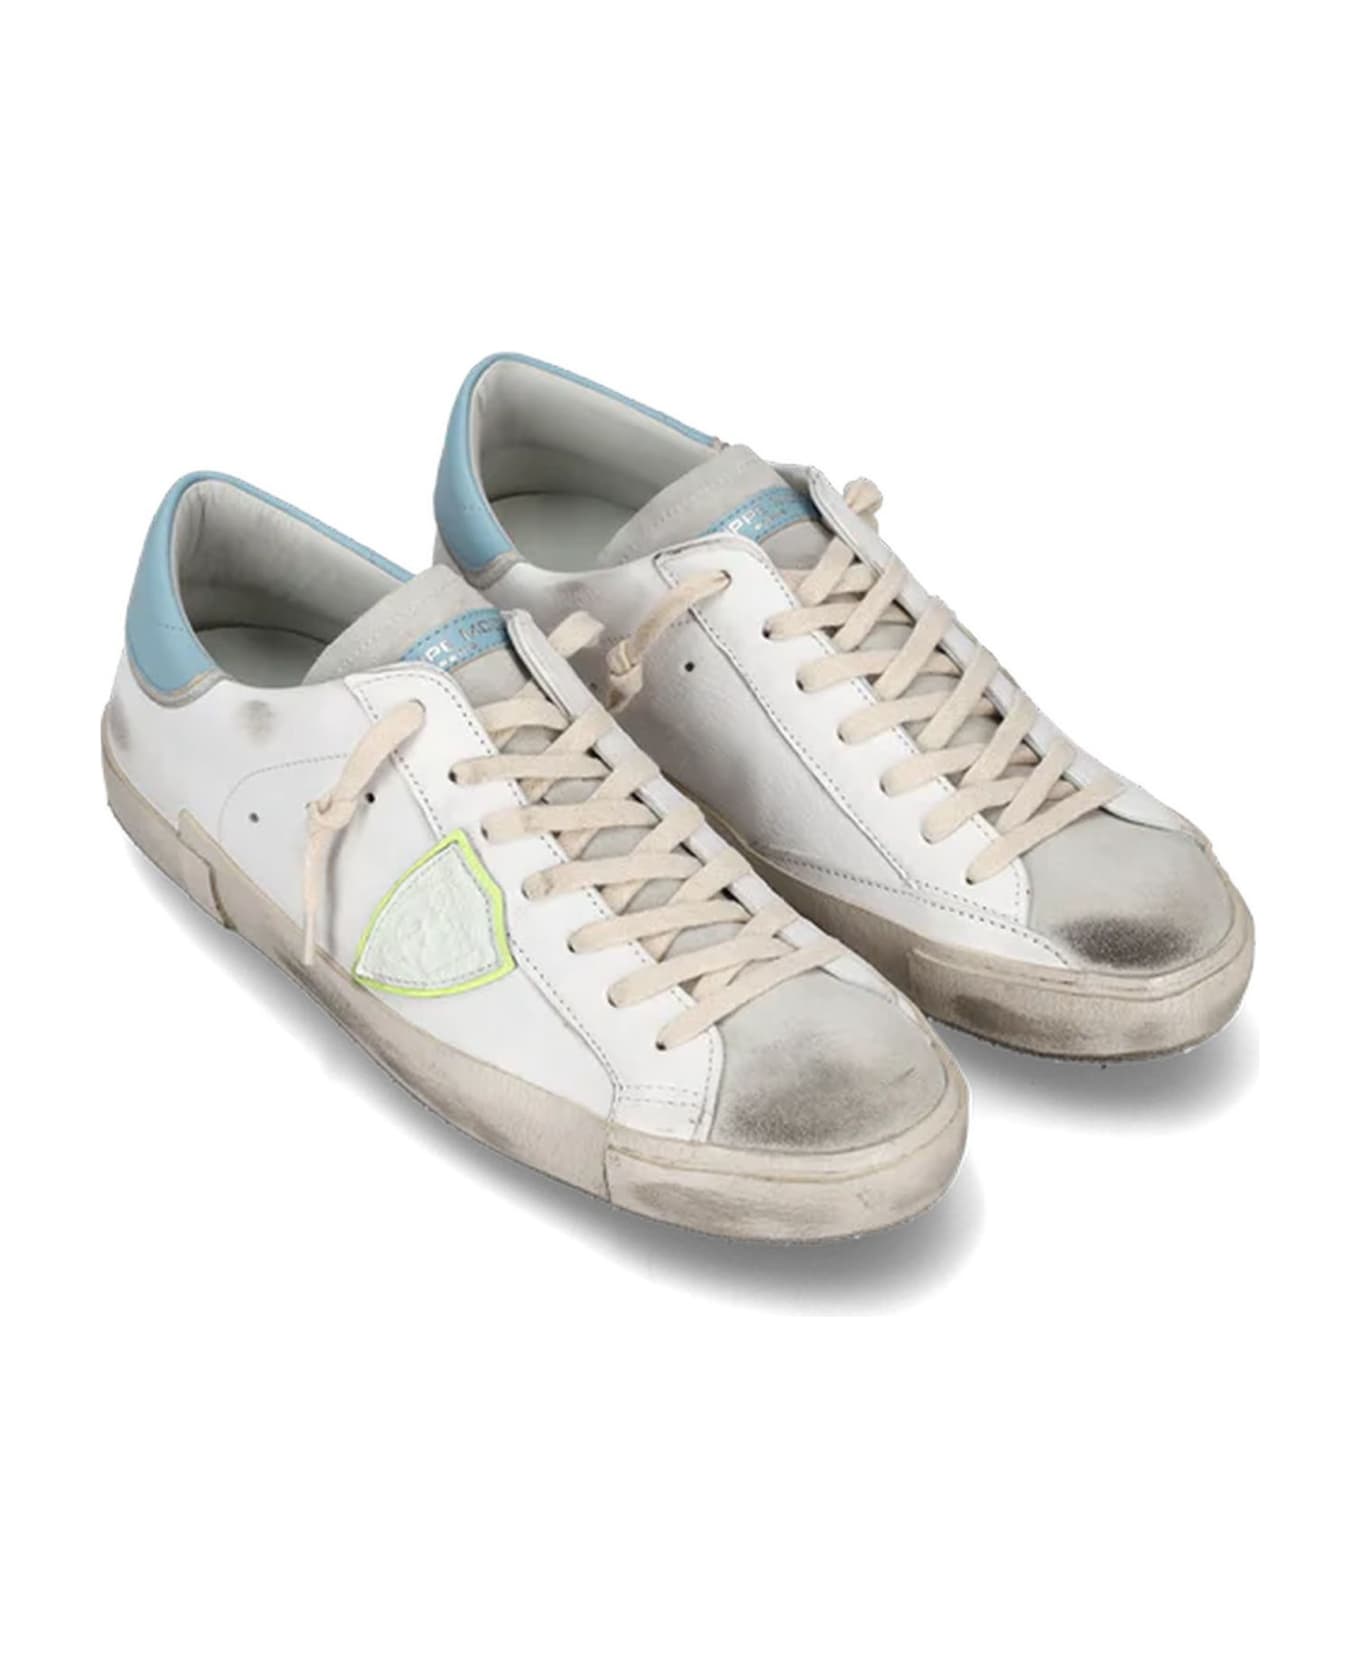 Philippe Model Prsx Sneaker White, Grey And Light Blue - Gris Azul